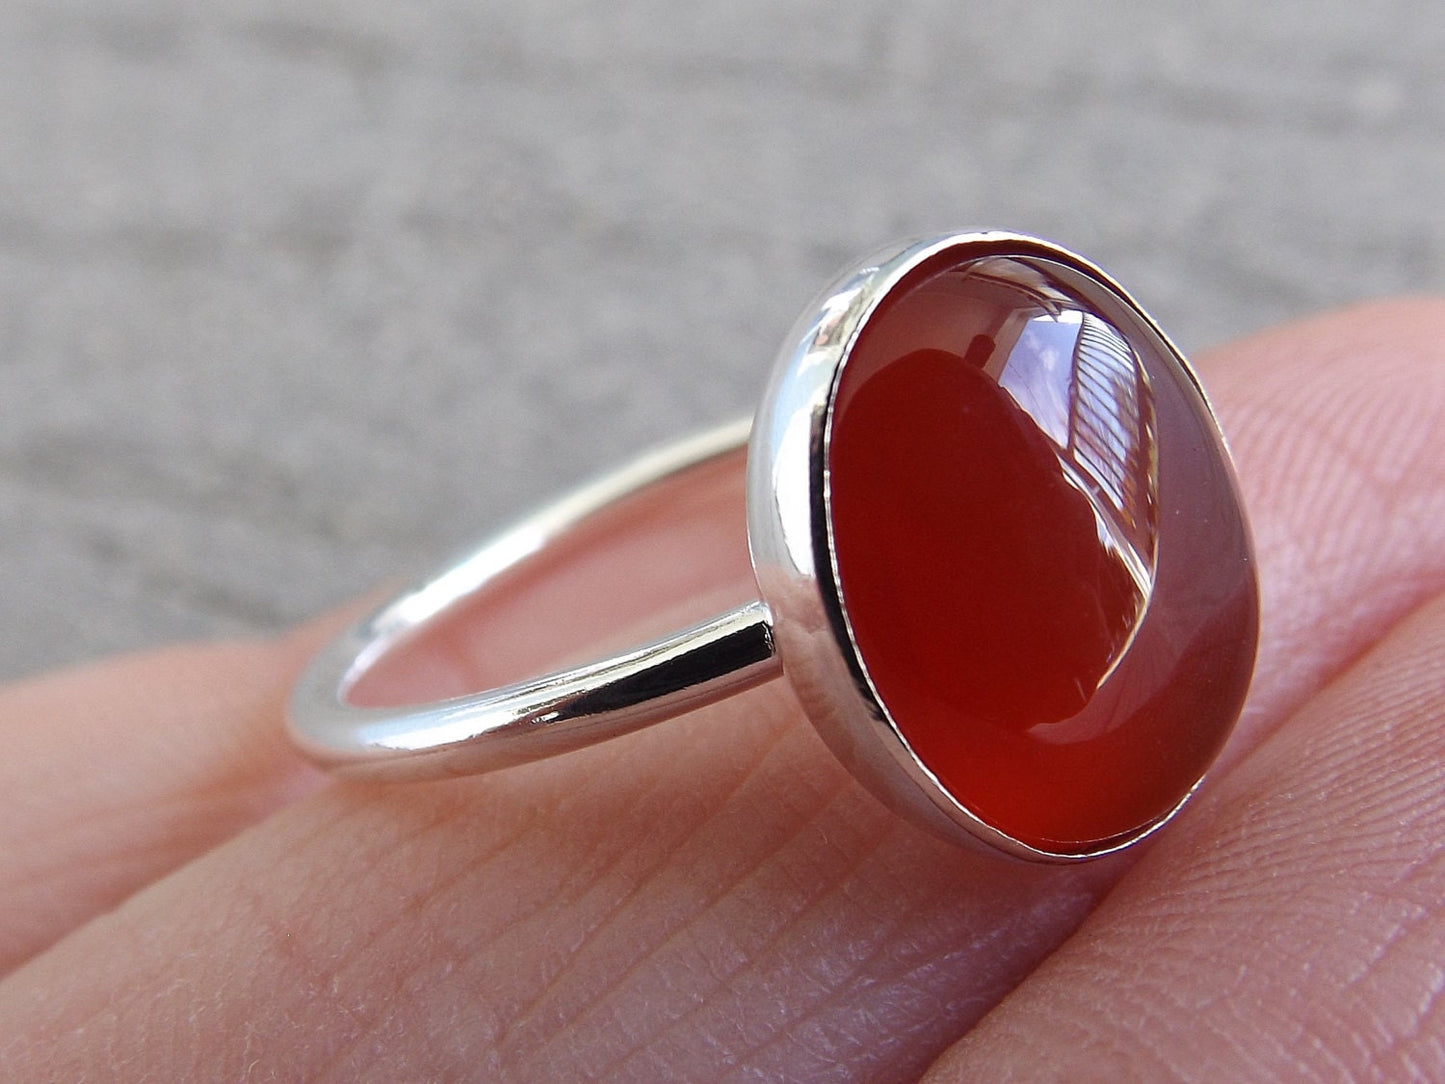 Carnelian Ring, Gemstone Ring, Large Carnelian Ring, Red, Modern, Simple, Everyday, Gift, Gemstone Jewelry, Natural Stone, Cocktail Ring